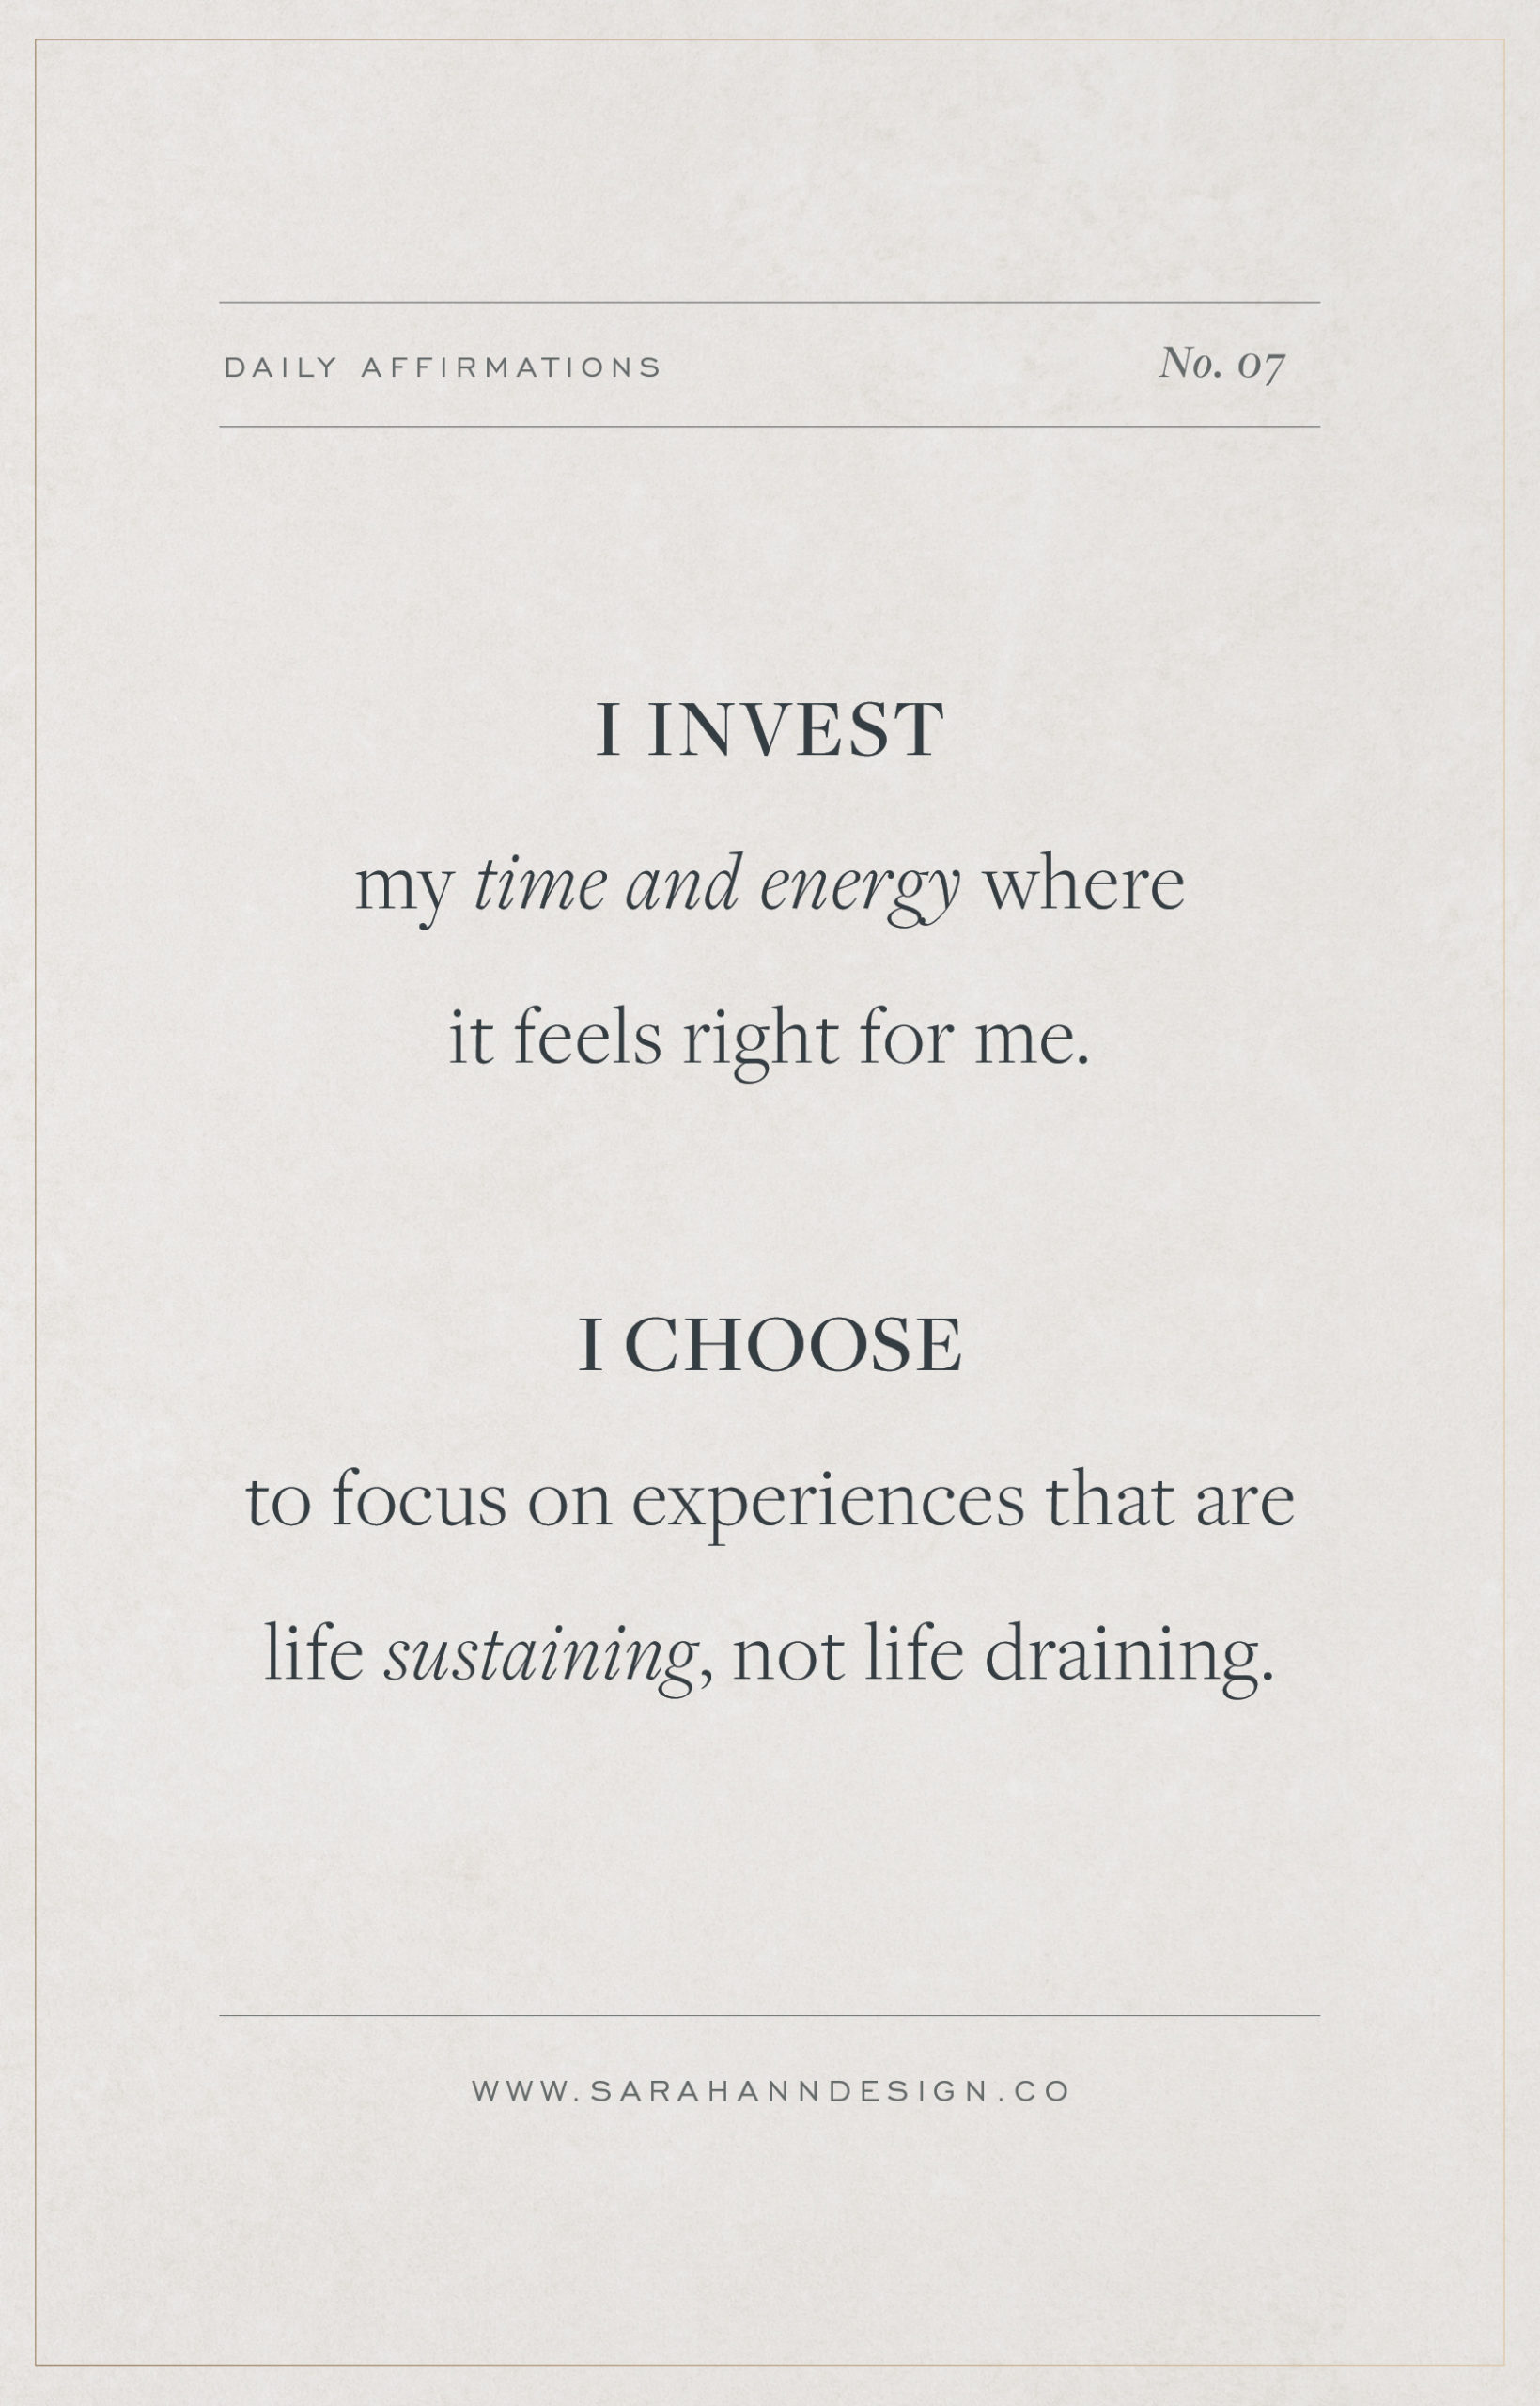 Affirmations for Creatives // 23 Daily Affirmations for Creative Inspiration // Sarah Ann Design